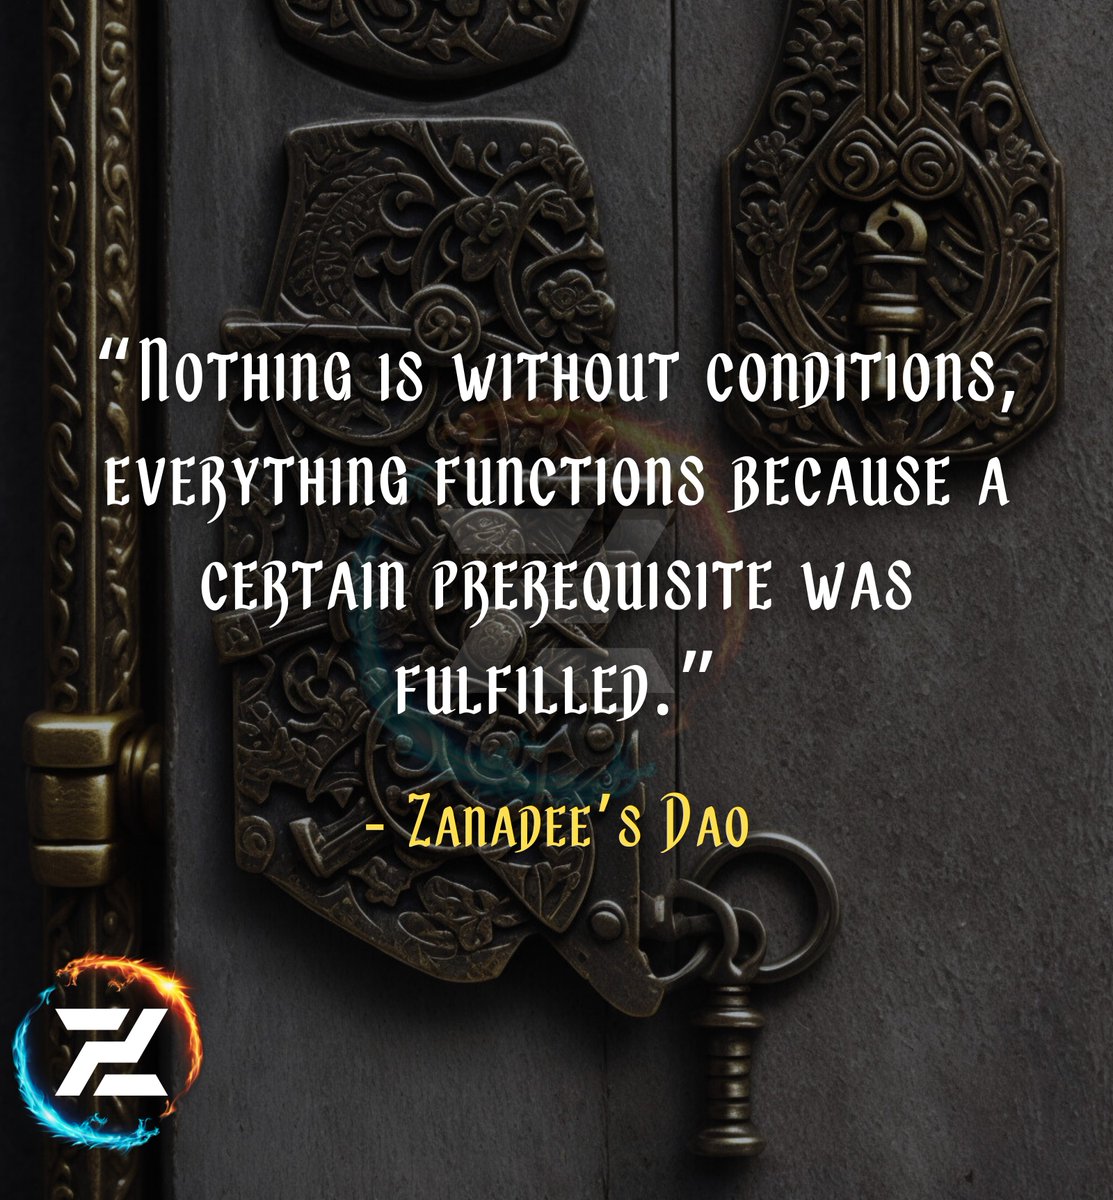 Prerequisites of Existence

“Nothing is without conditions, everything functions because a certain prerequisite was fulfilled.”

#CauseAndEffect #Existence #NothingIsUnconditional #ContinuousFlow #Spirituality

Zanadee’s Dao